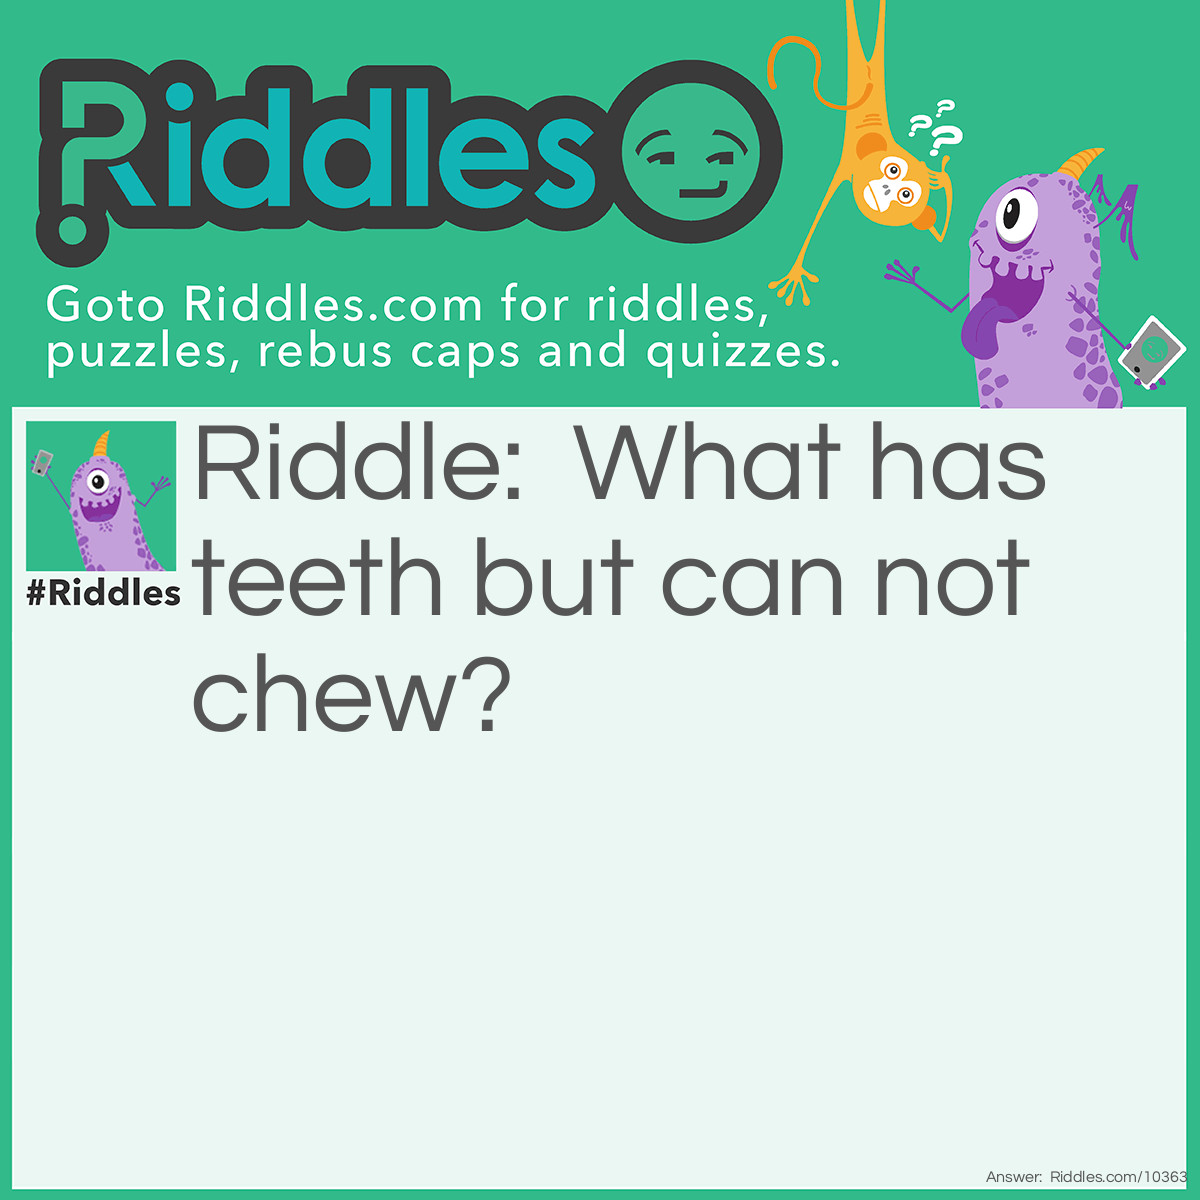 Riddle: What has teeth but can not chew? Answer: A comb